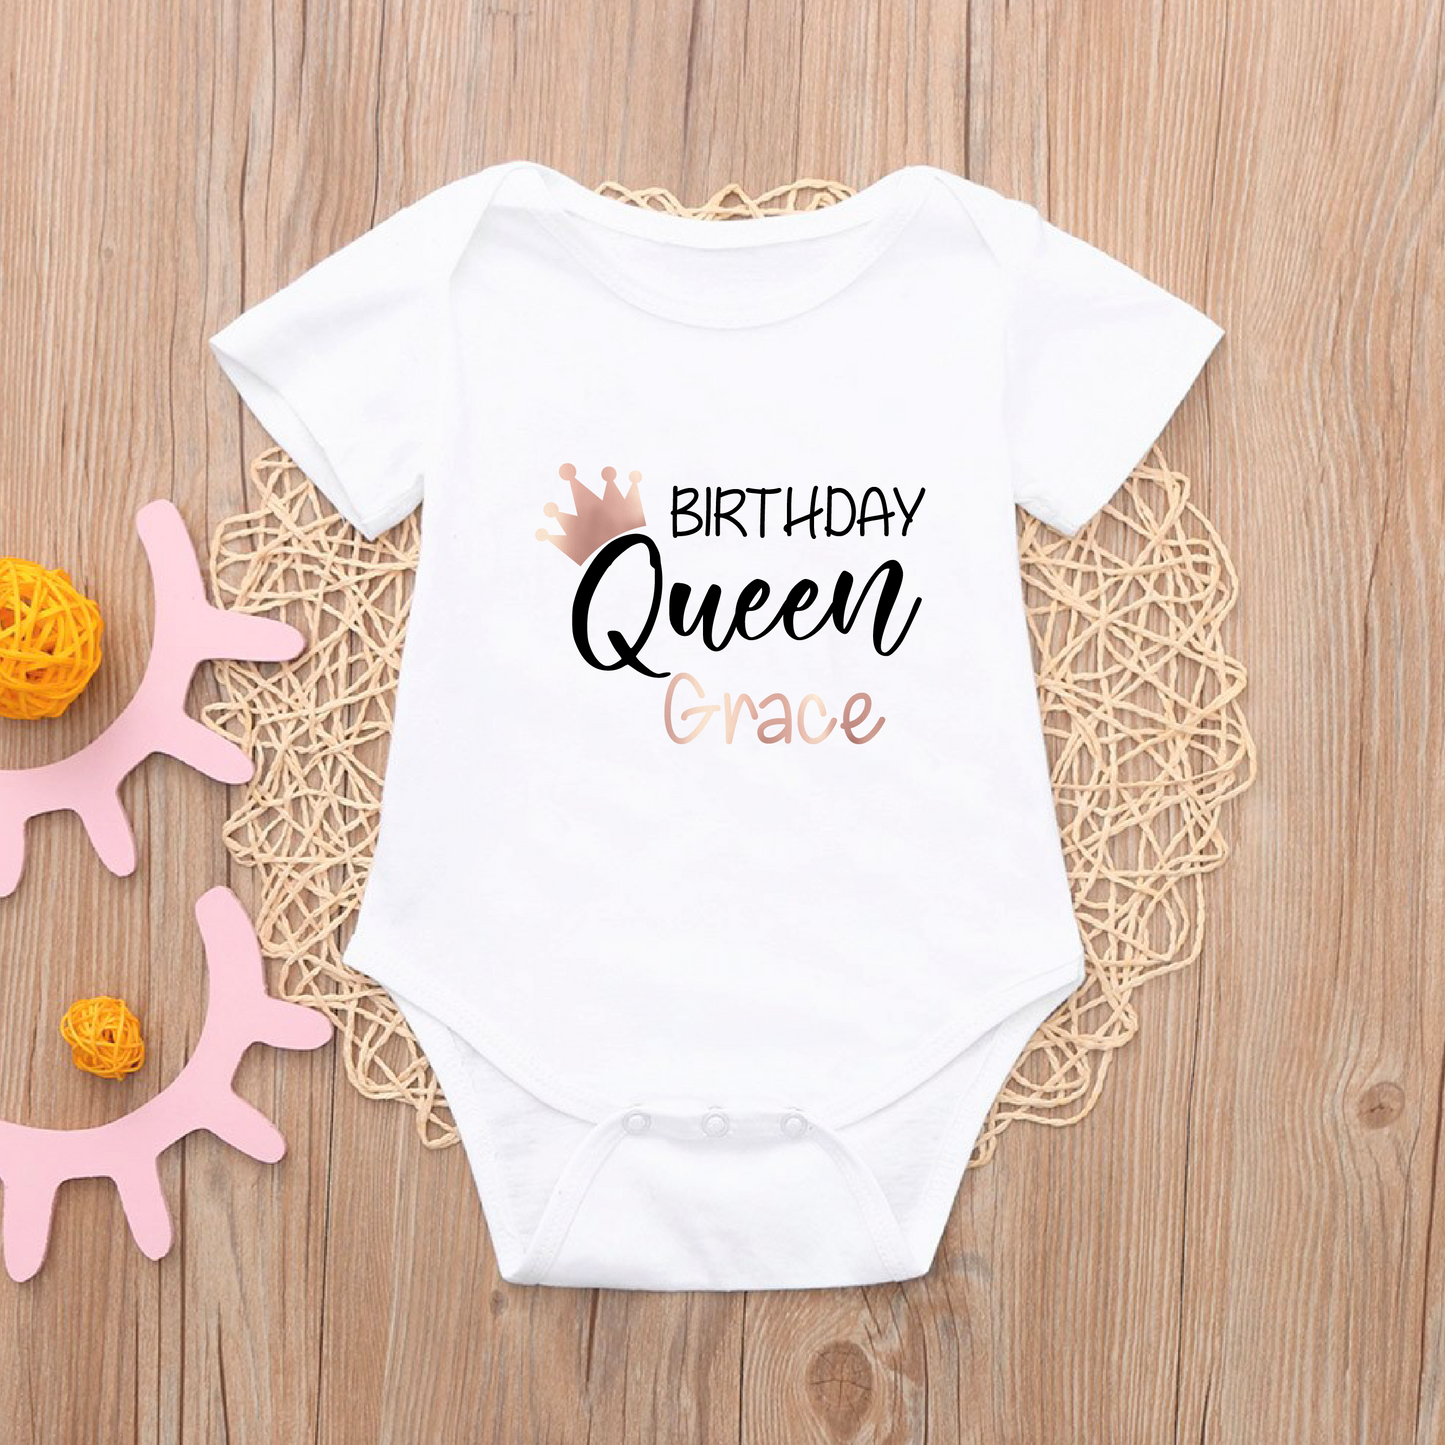 Personalised Birthday Queen T-shirt for Kids and Baby Vest for Babies